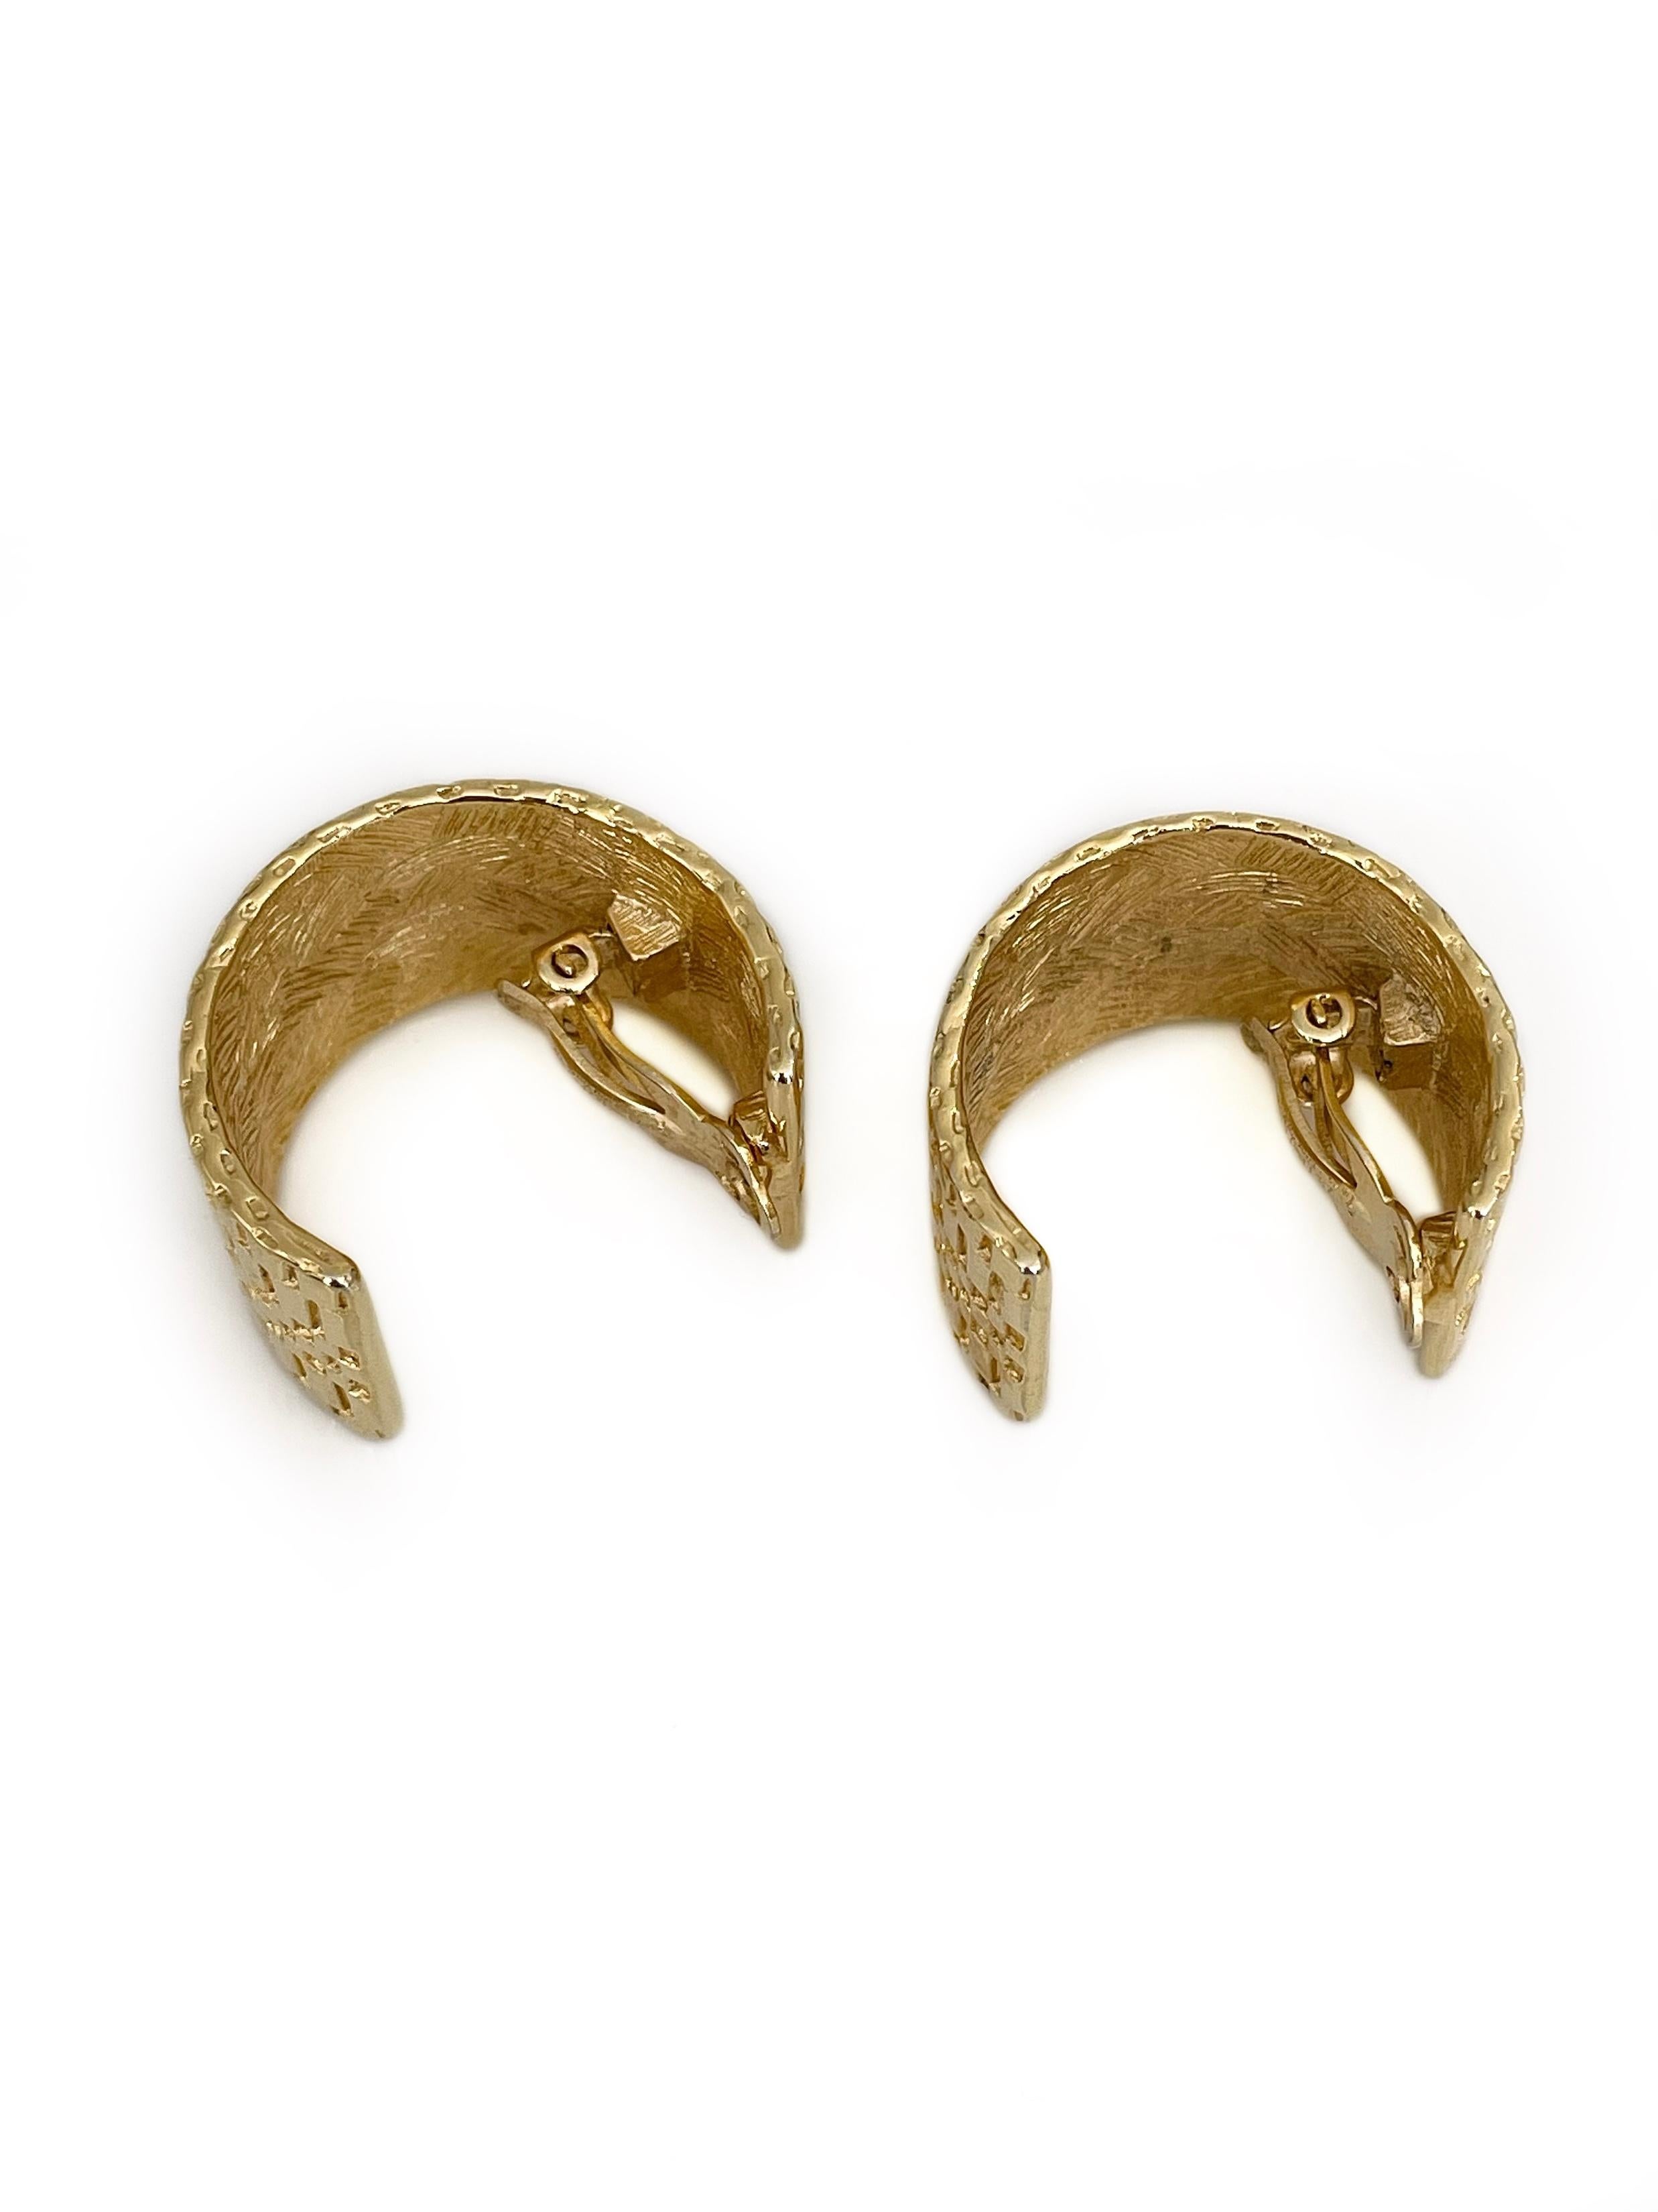 This is a vintage pair of semi hoop clip on earrings designed by Givenchy in 1990’s. This piece is gold plated and subtly textured. 

Signed: 